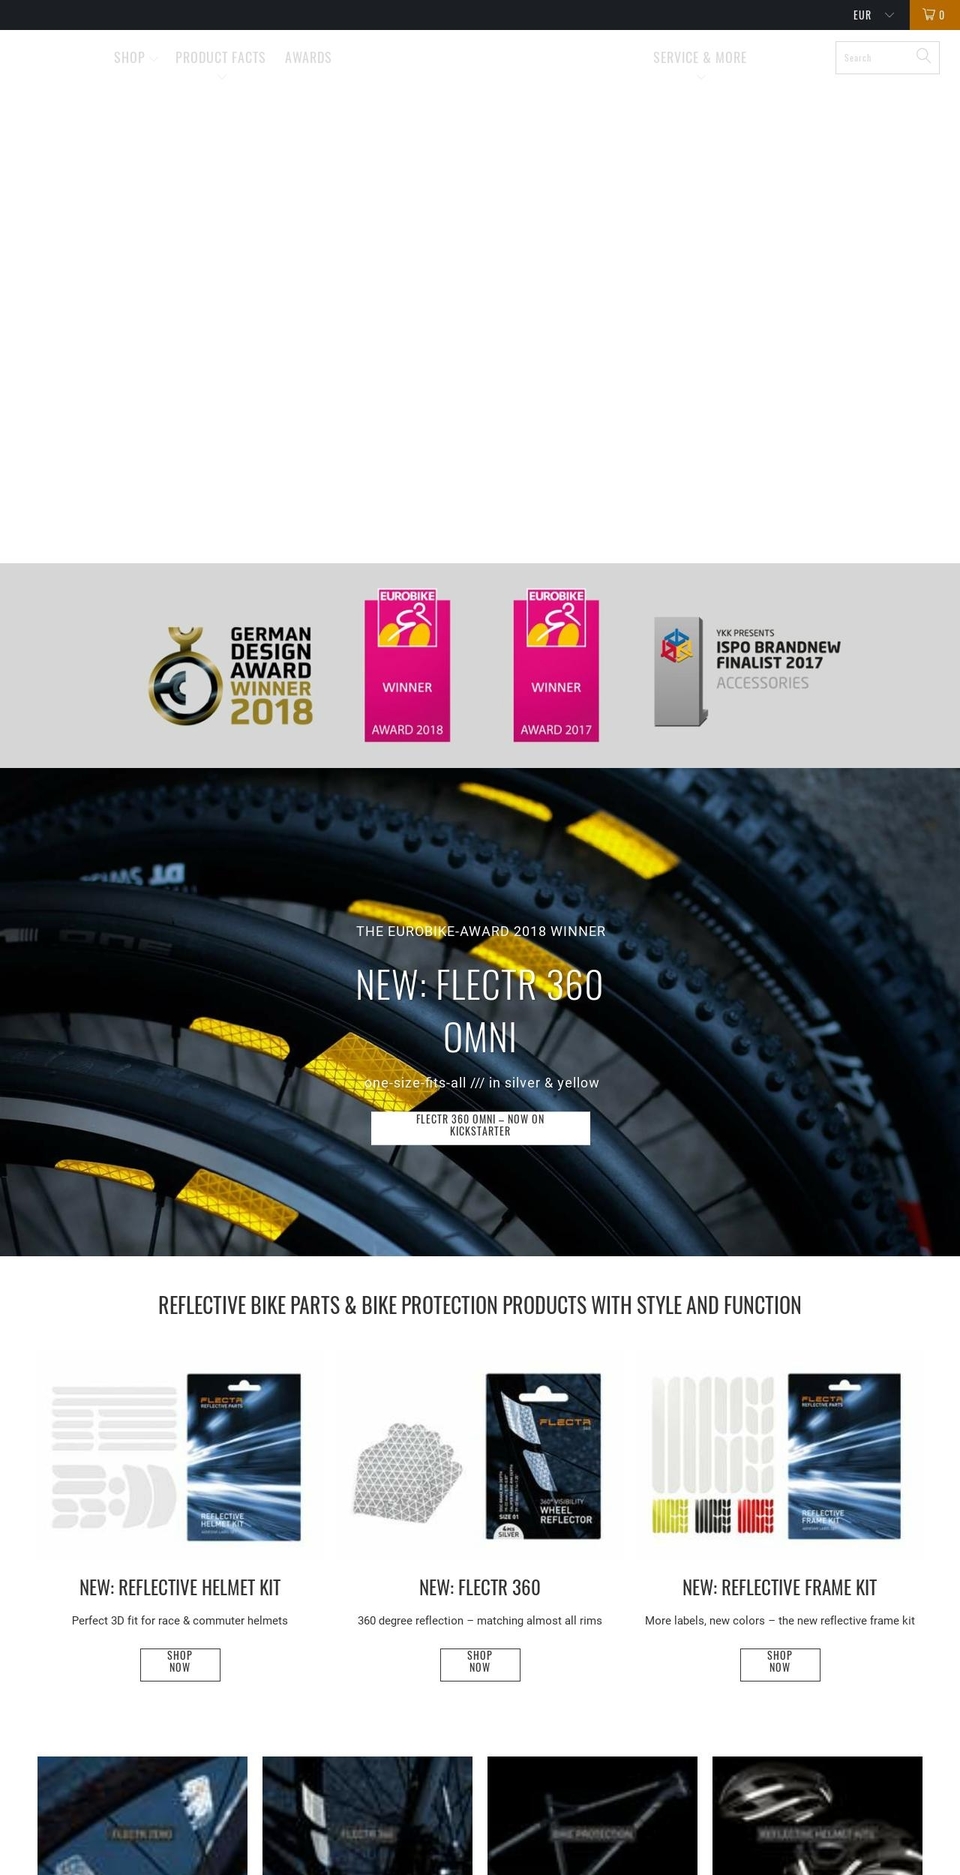 Turbo-April-13-2018-May-1-2018-July-9-2018 Shopify theme site example flectr.bike